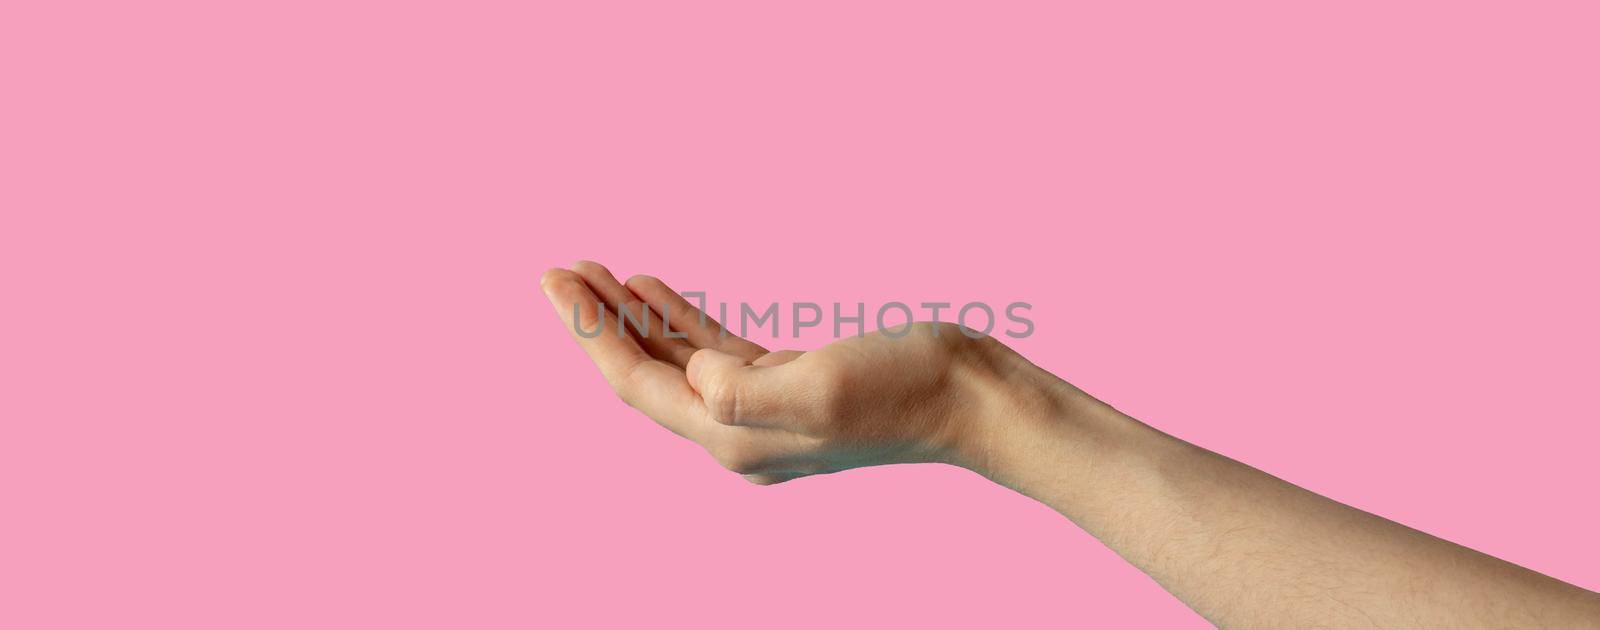 The hand is extended palm up.The hand is open and ready to help or accept. A gesture highlighted on a pink background with a clipping outline.